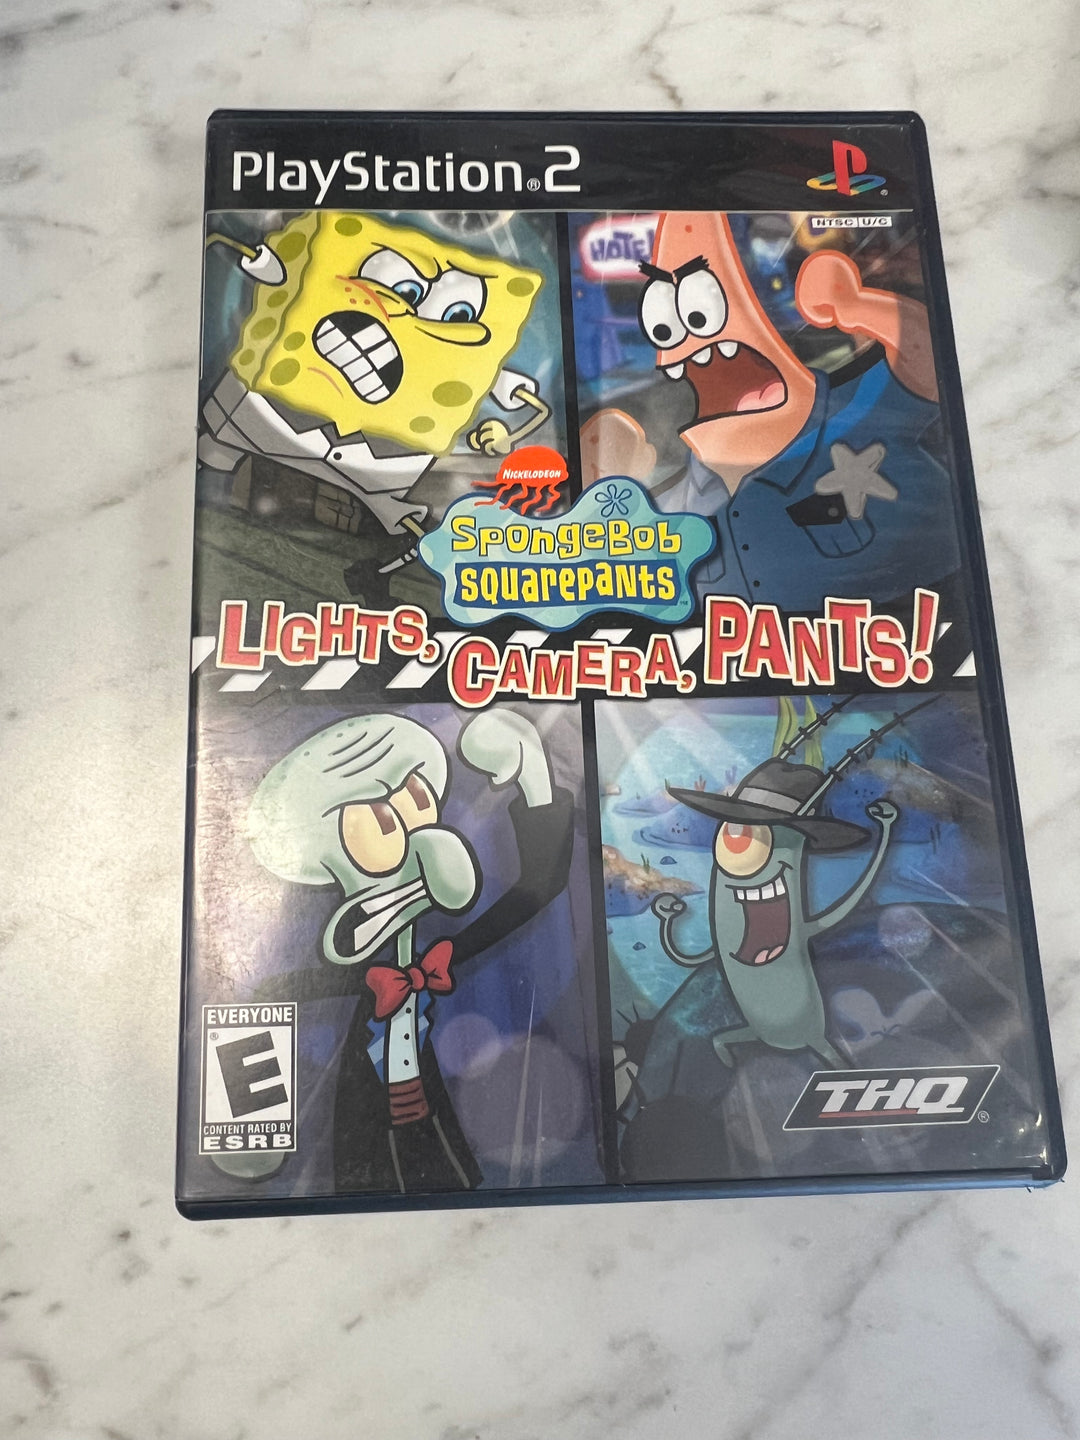 Spongebob Squarepants Lights, Camera, Pants for Playstation 2 PS2 in case Used. Tested and Working.     DO62924